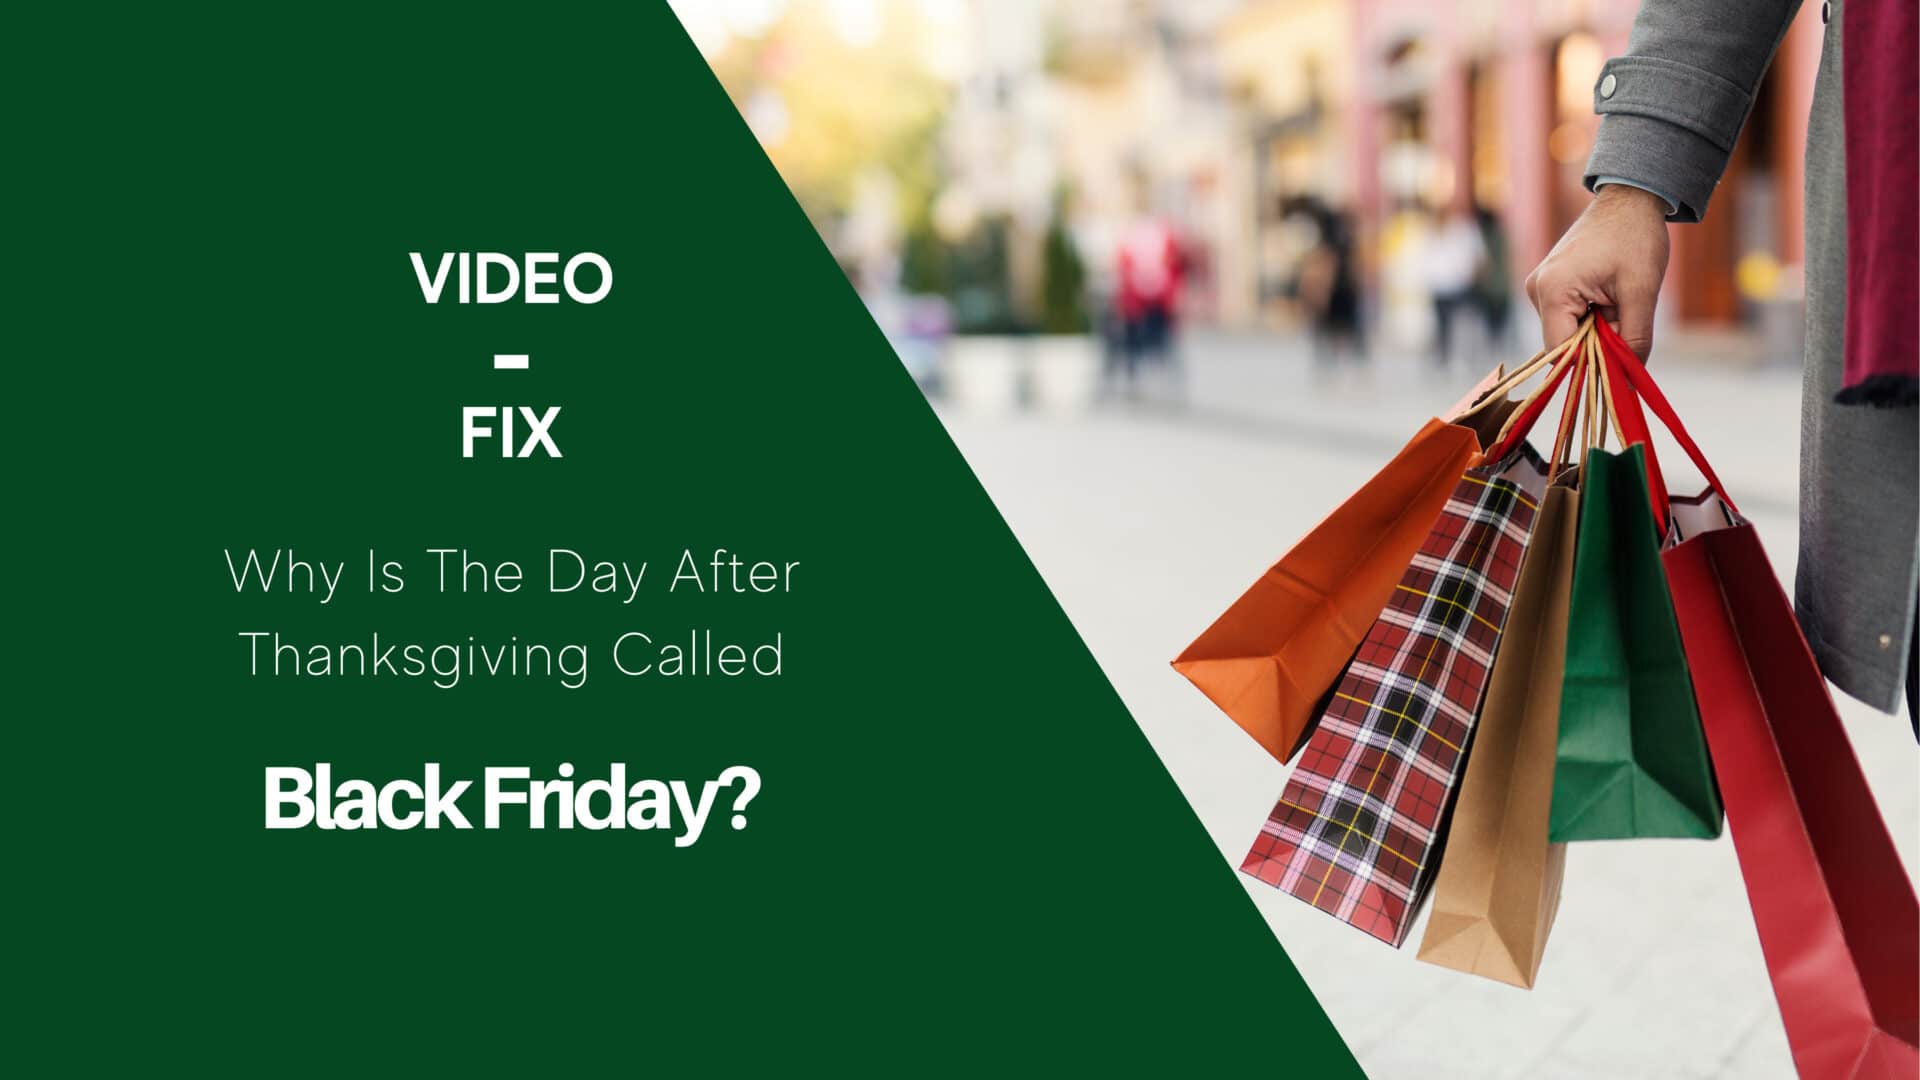 Video-Fix: Why Is The Day After Thanksgiving Called Black Friday - Why Do Black Friday Deals Suck